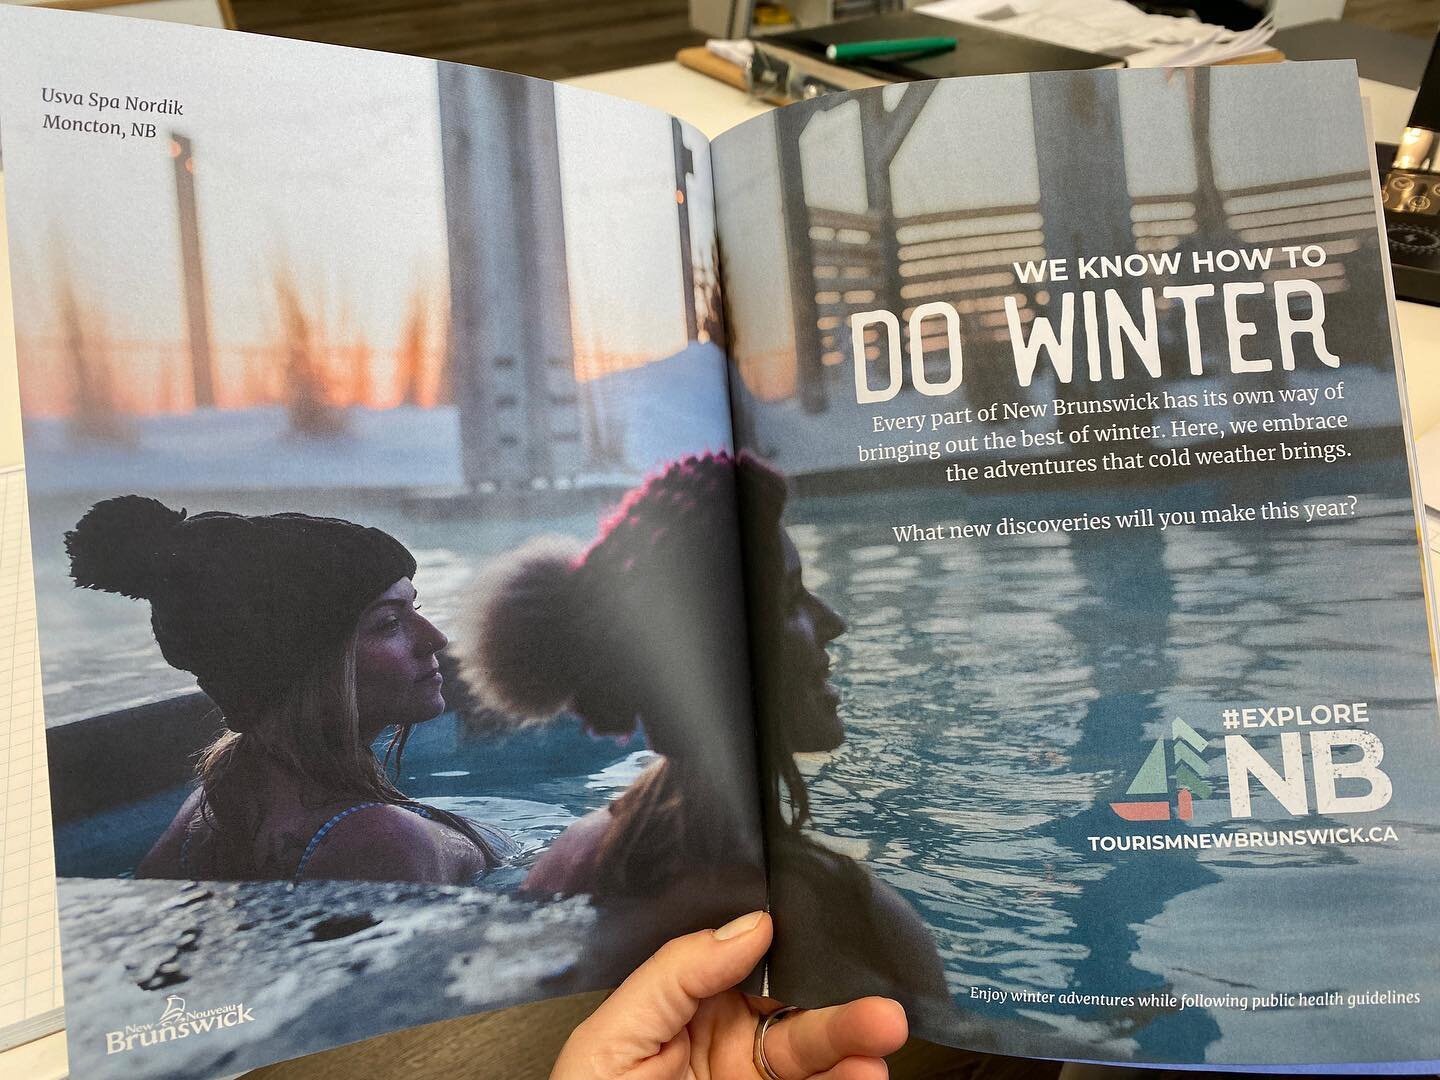 Perfect winter day to think about the spa @genevieve_nolet_usva!  Nice to see on the inside cover of EDIT. #usvaspanordik